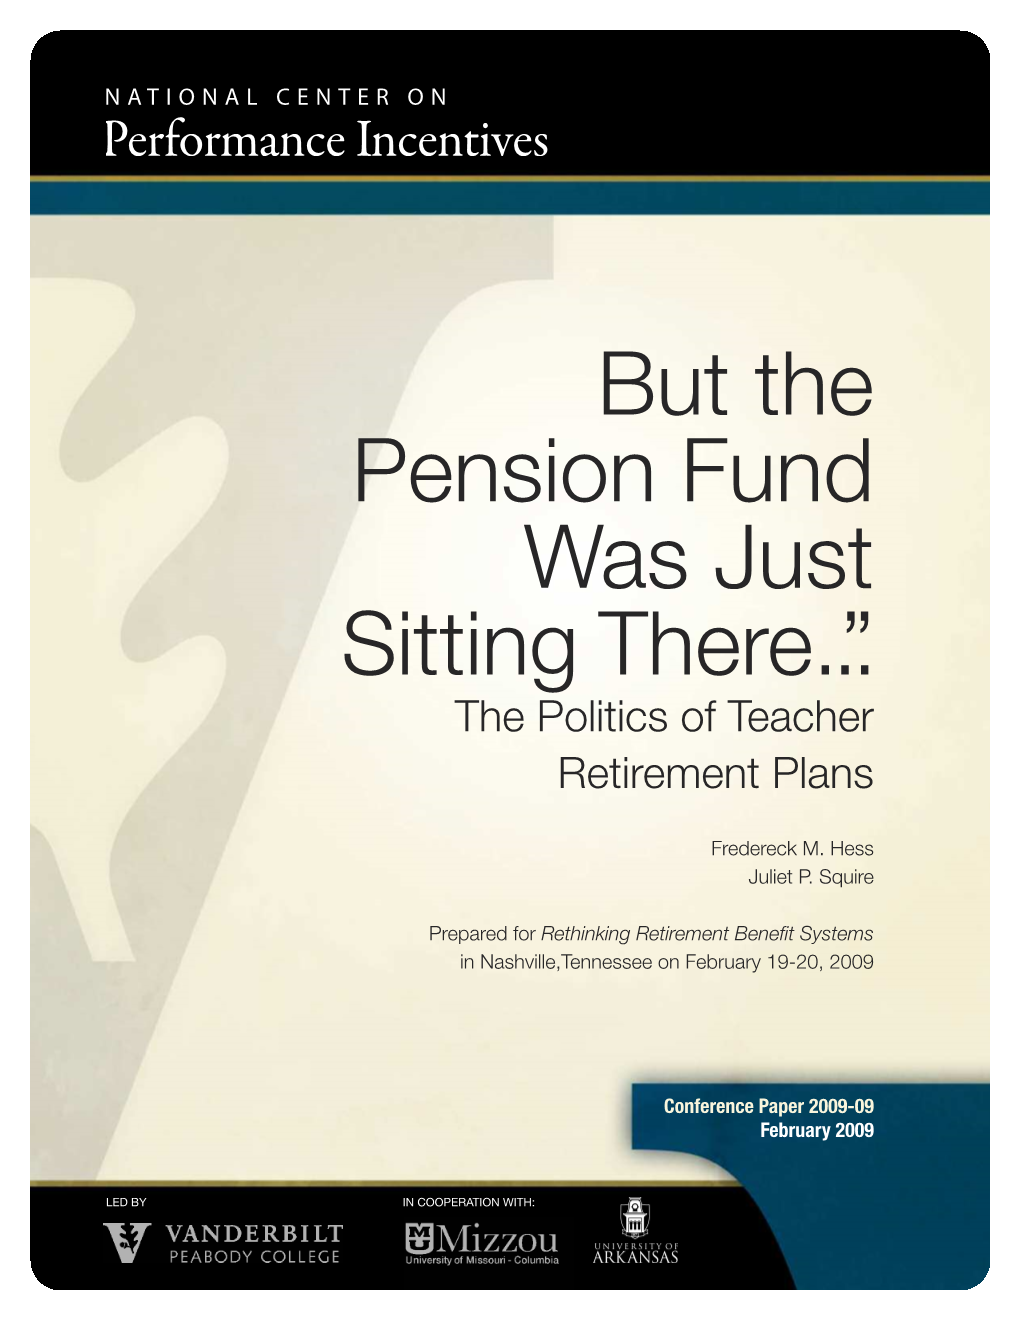 But the Pension Fund Was Just Sitting There...” the Politics of Teacher Retirement Plans